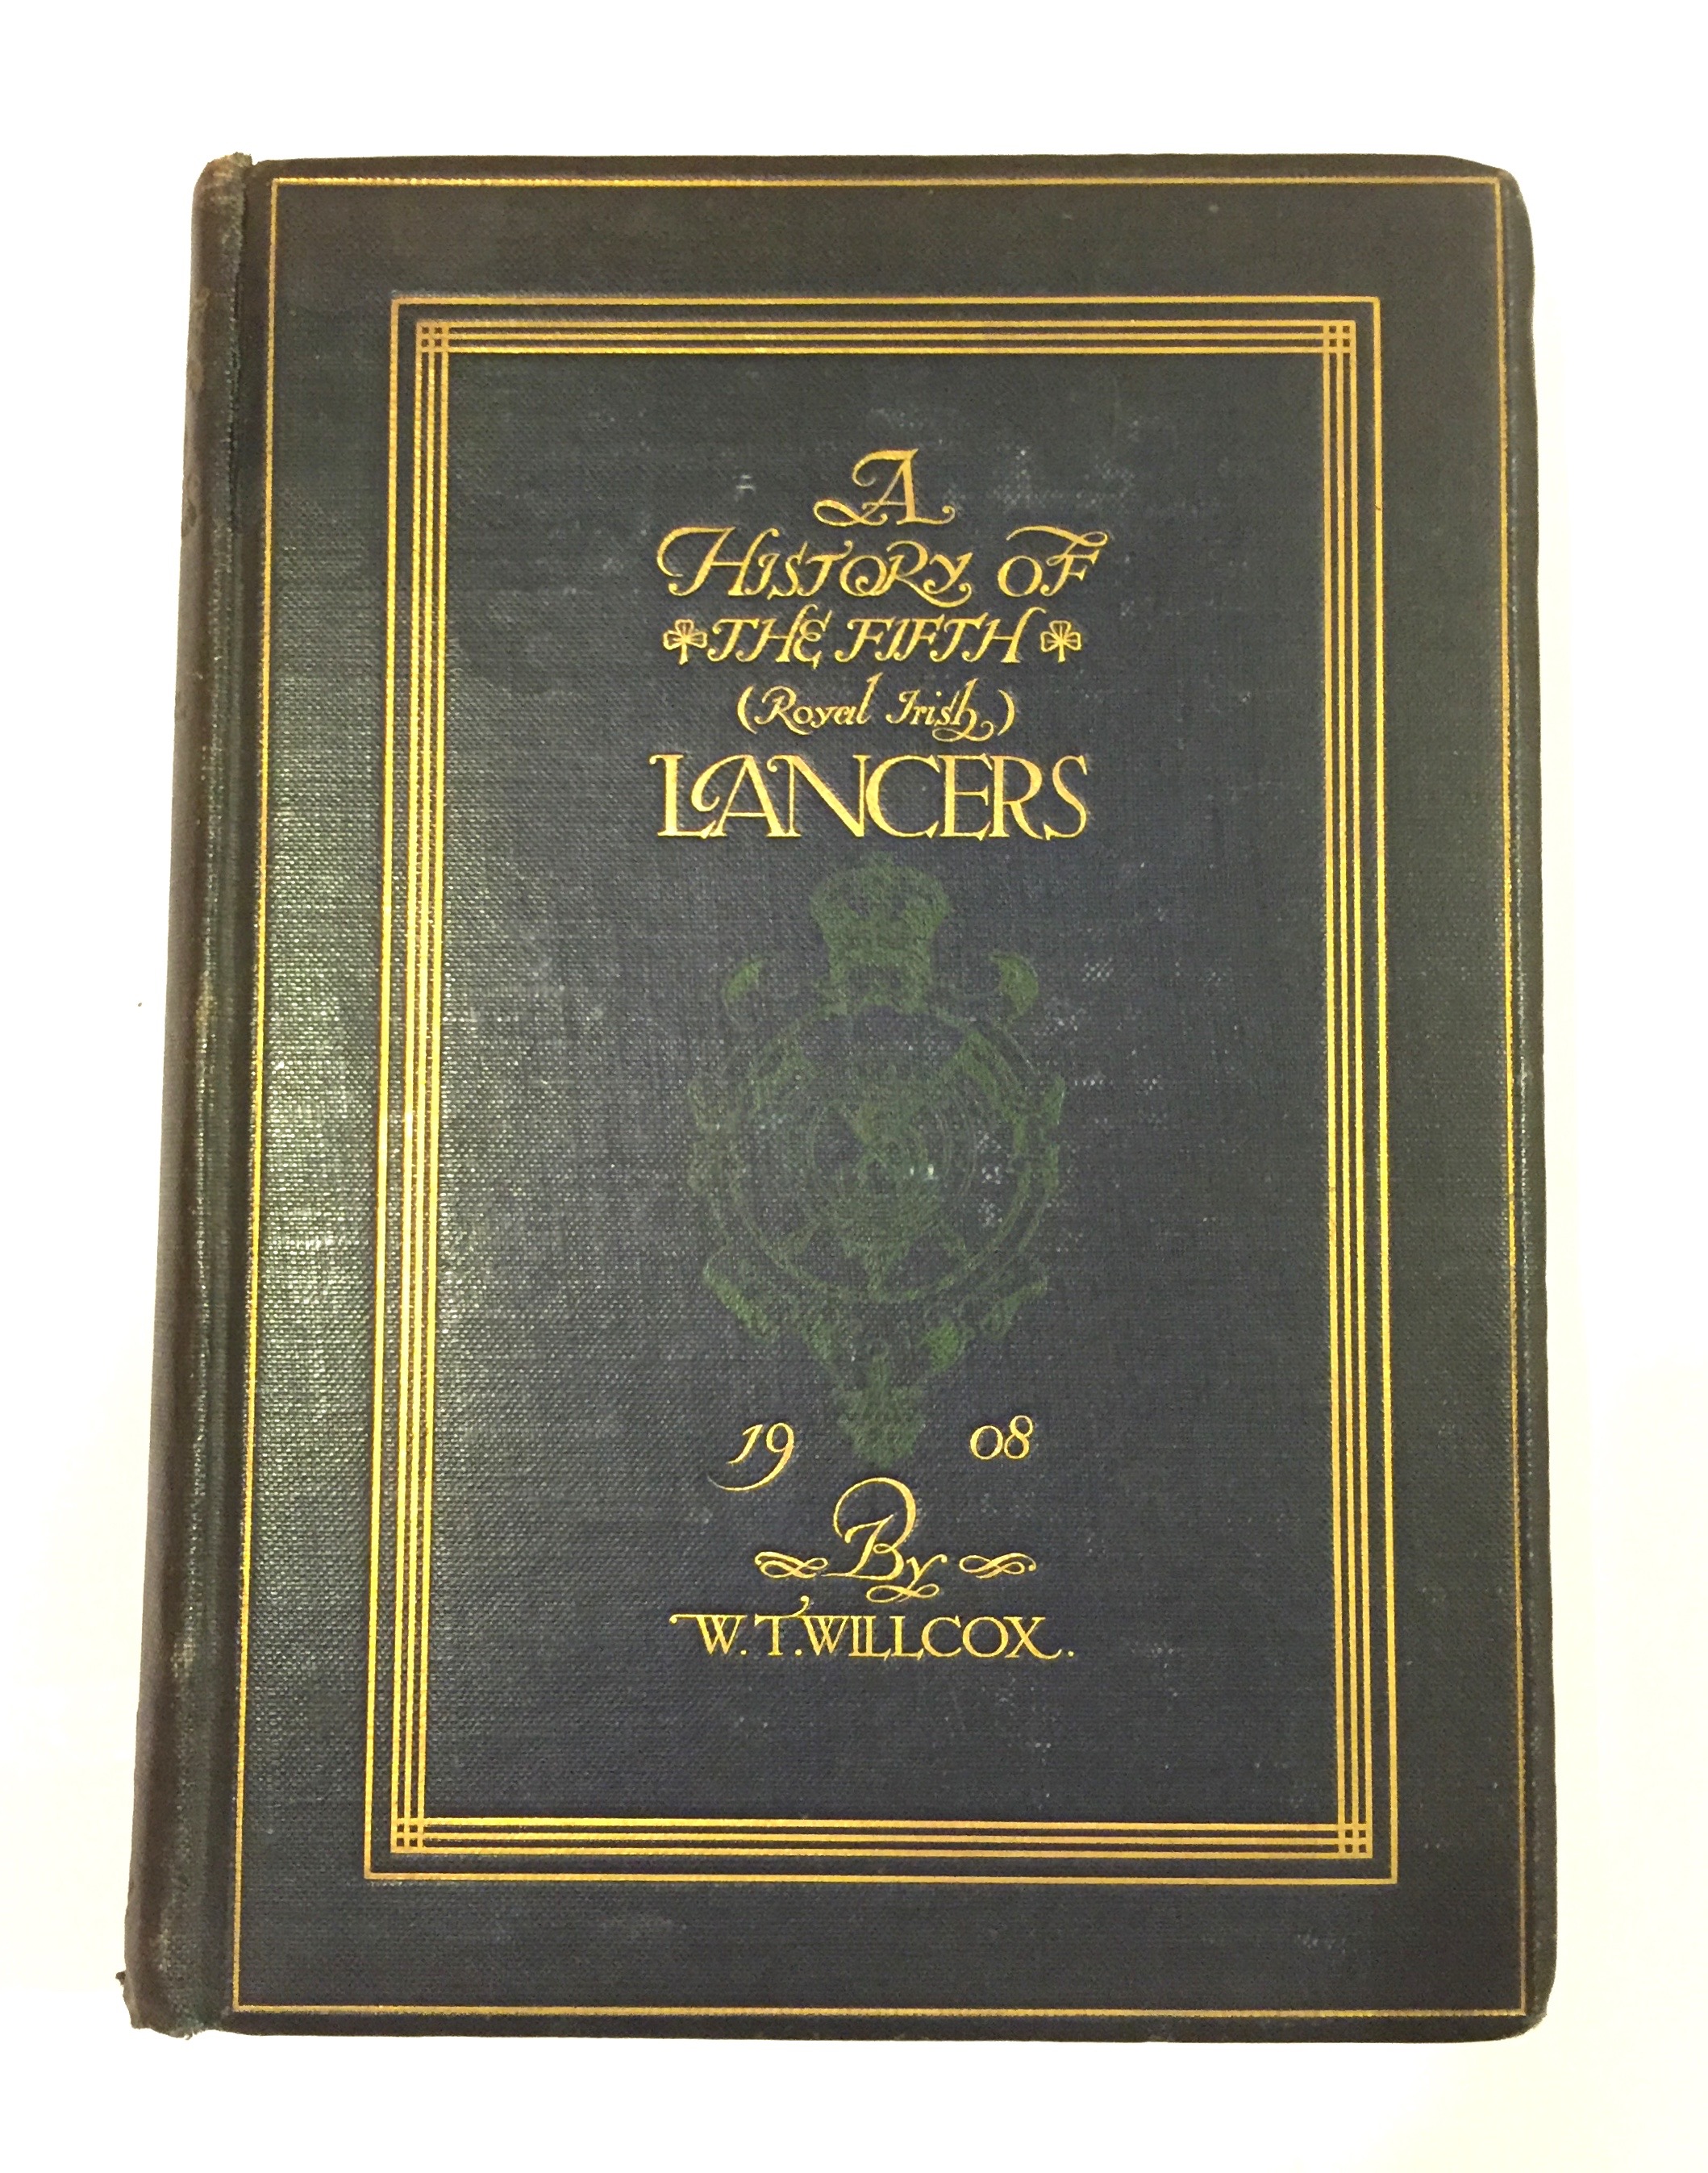 “Historical Records of the Fifth (Royal Irish) Lancers” A good scarce copy by Walter Temple Wilcox